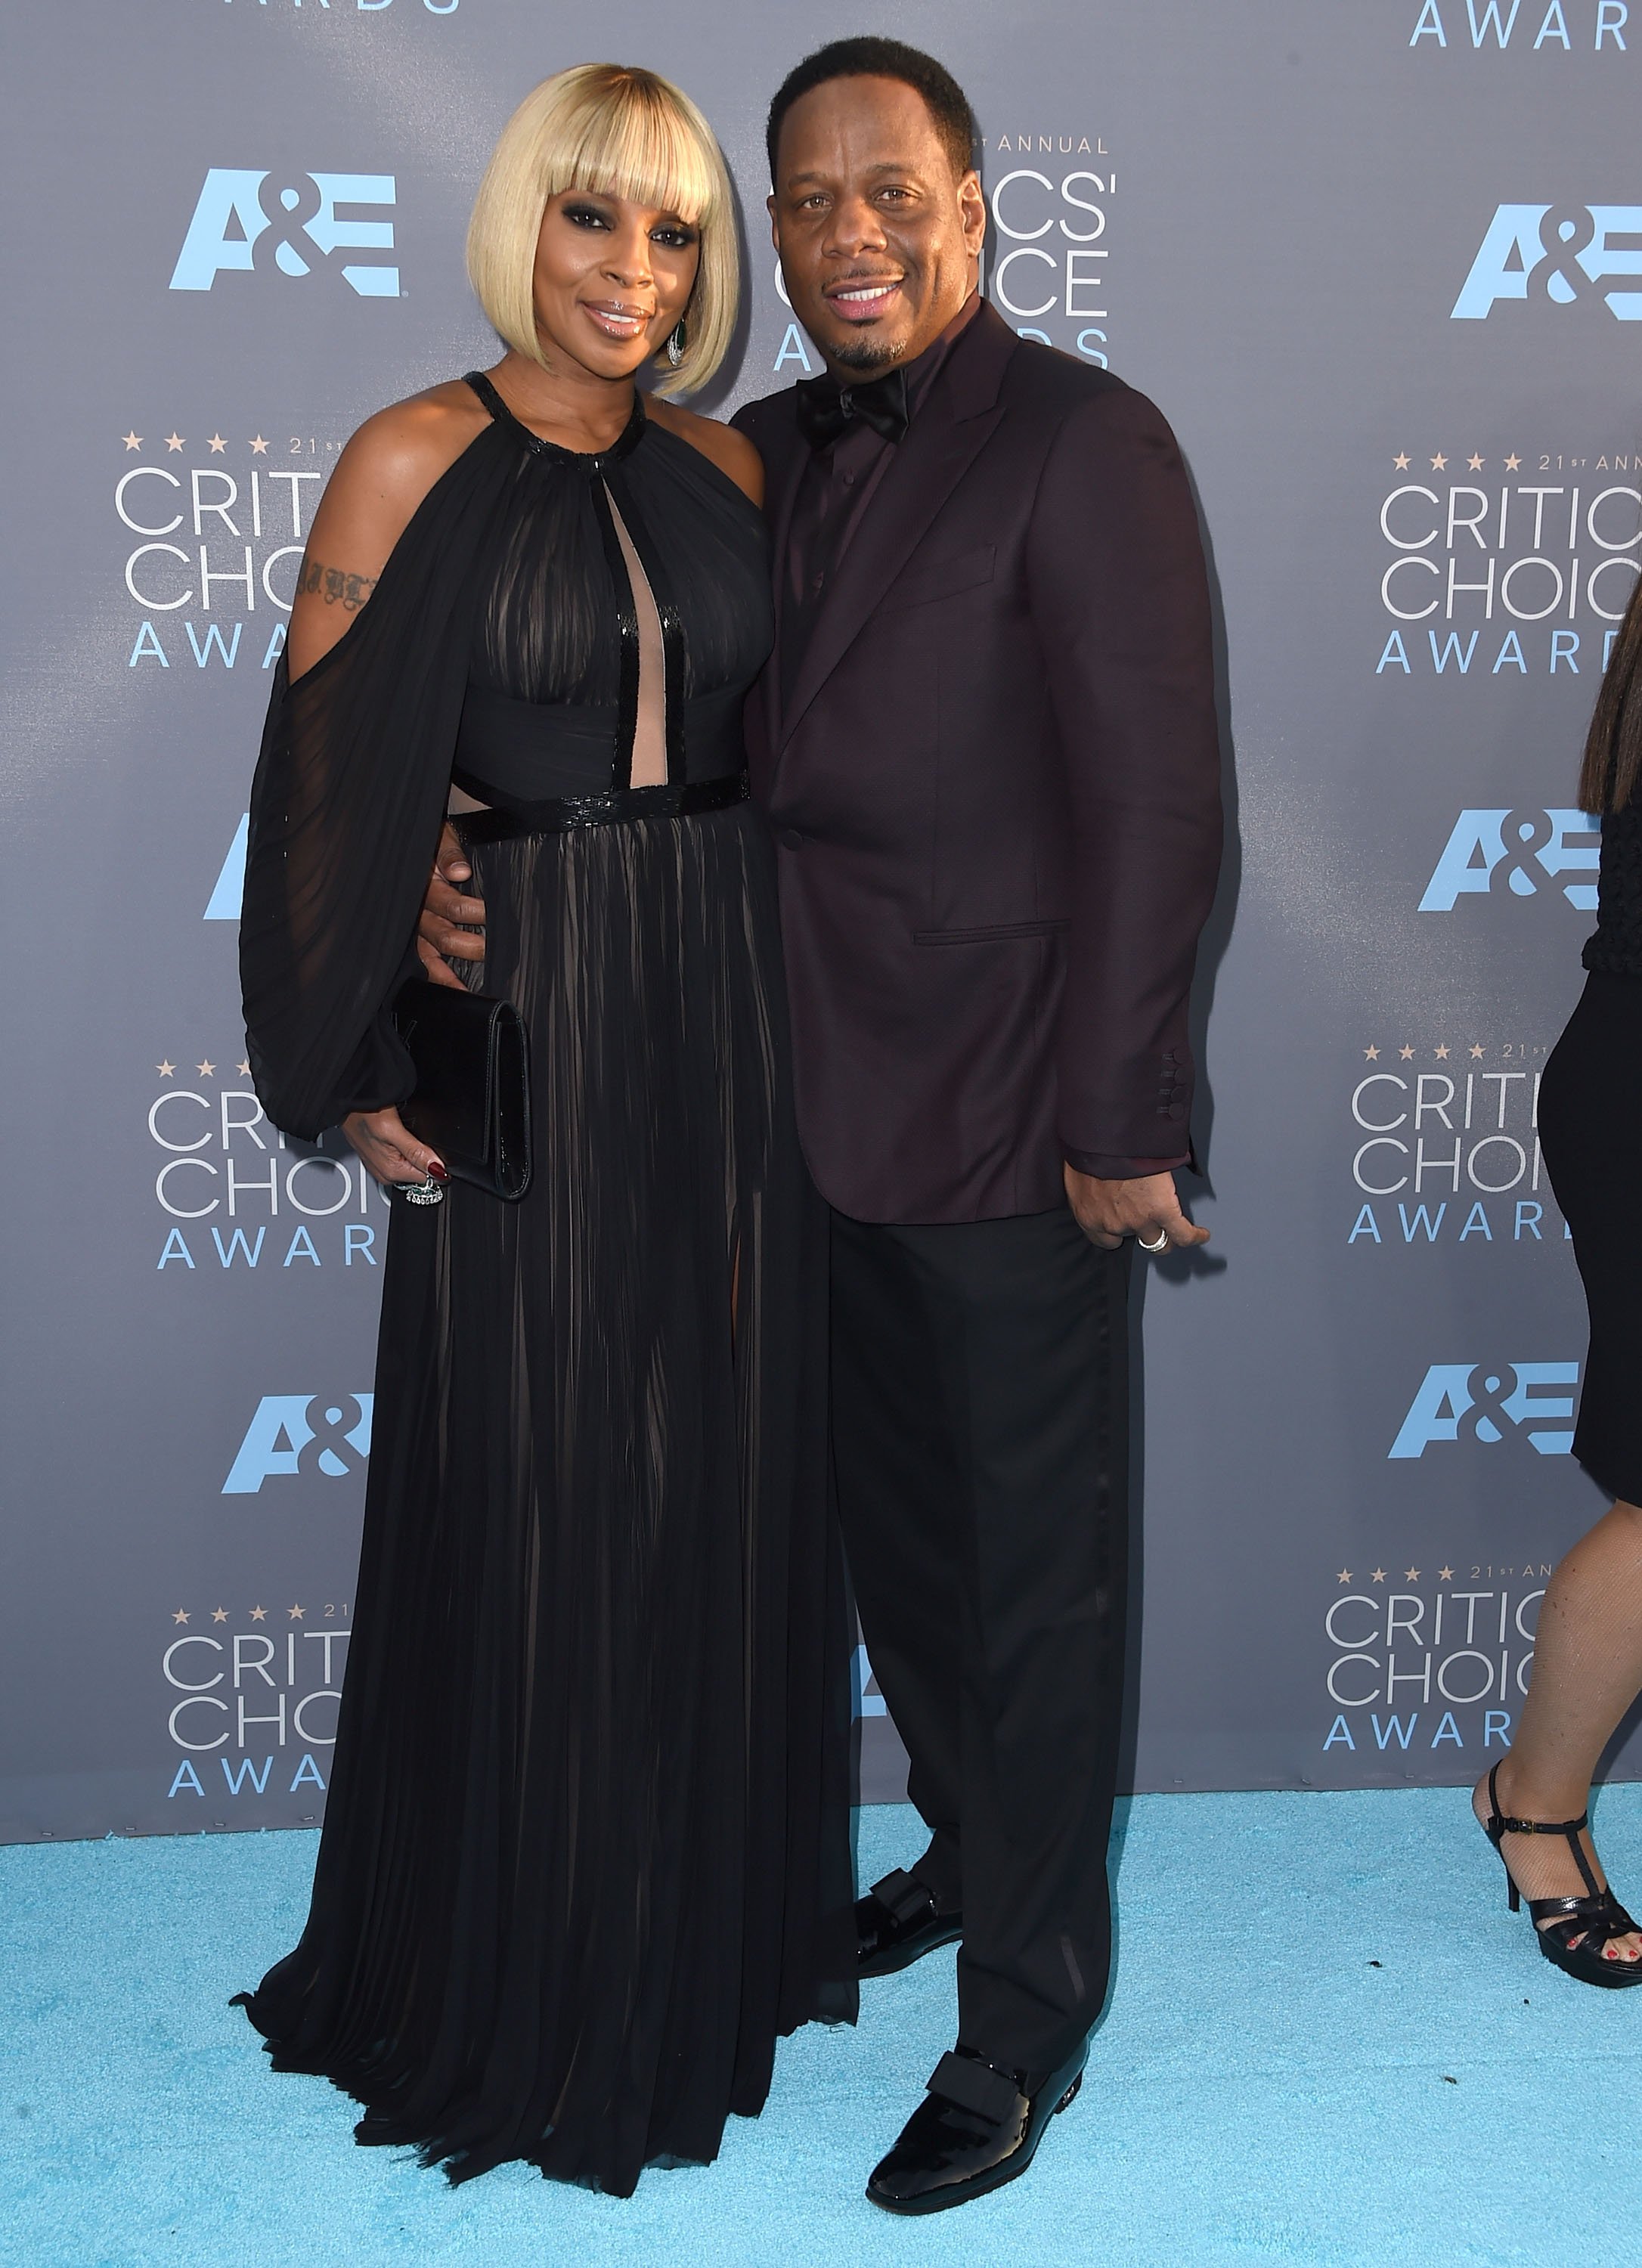 Mary J. Blige and Kendu Isaacs at The 21st Annual Critics' Choice Awards | Source: Getty Images